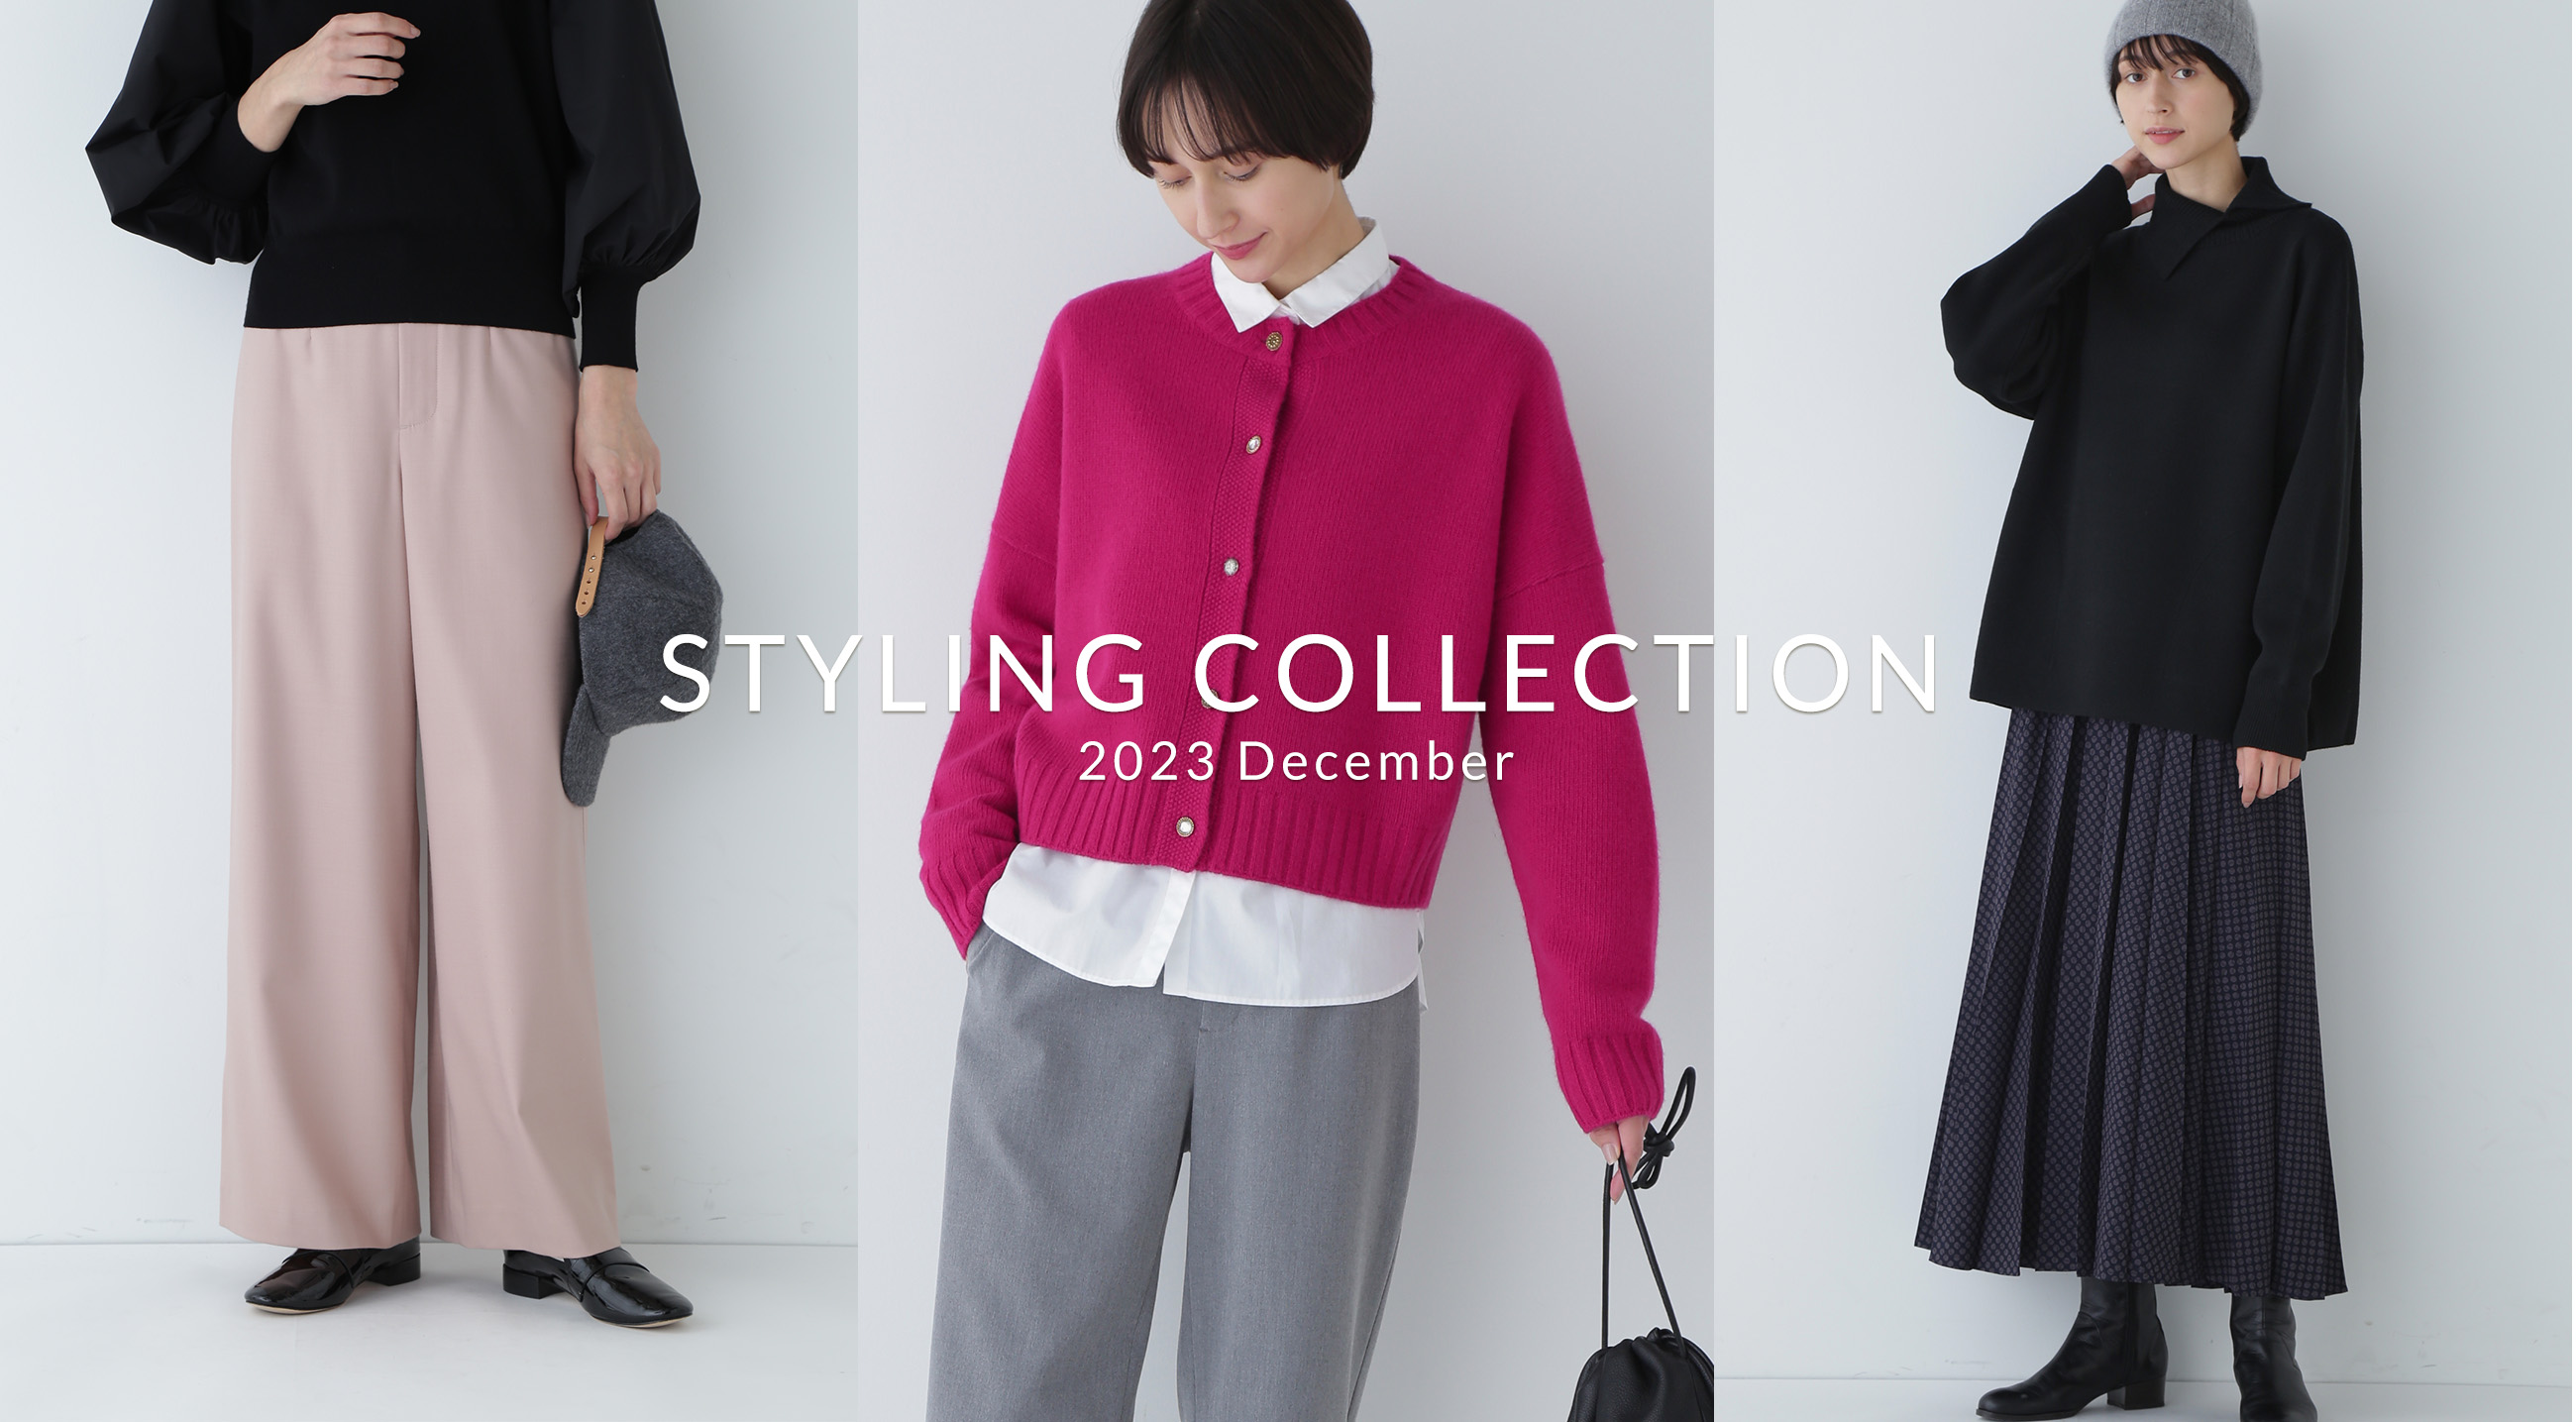 Styling Collection 2023 December